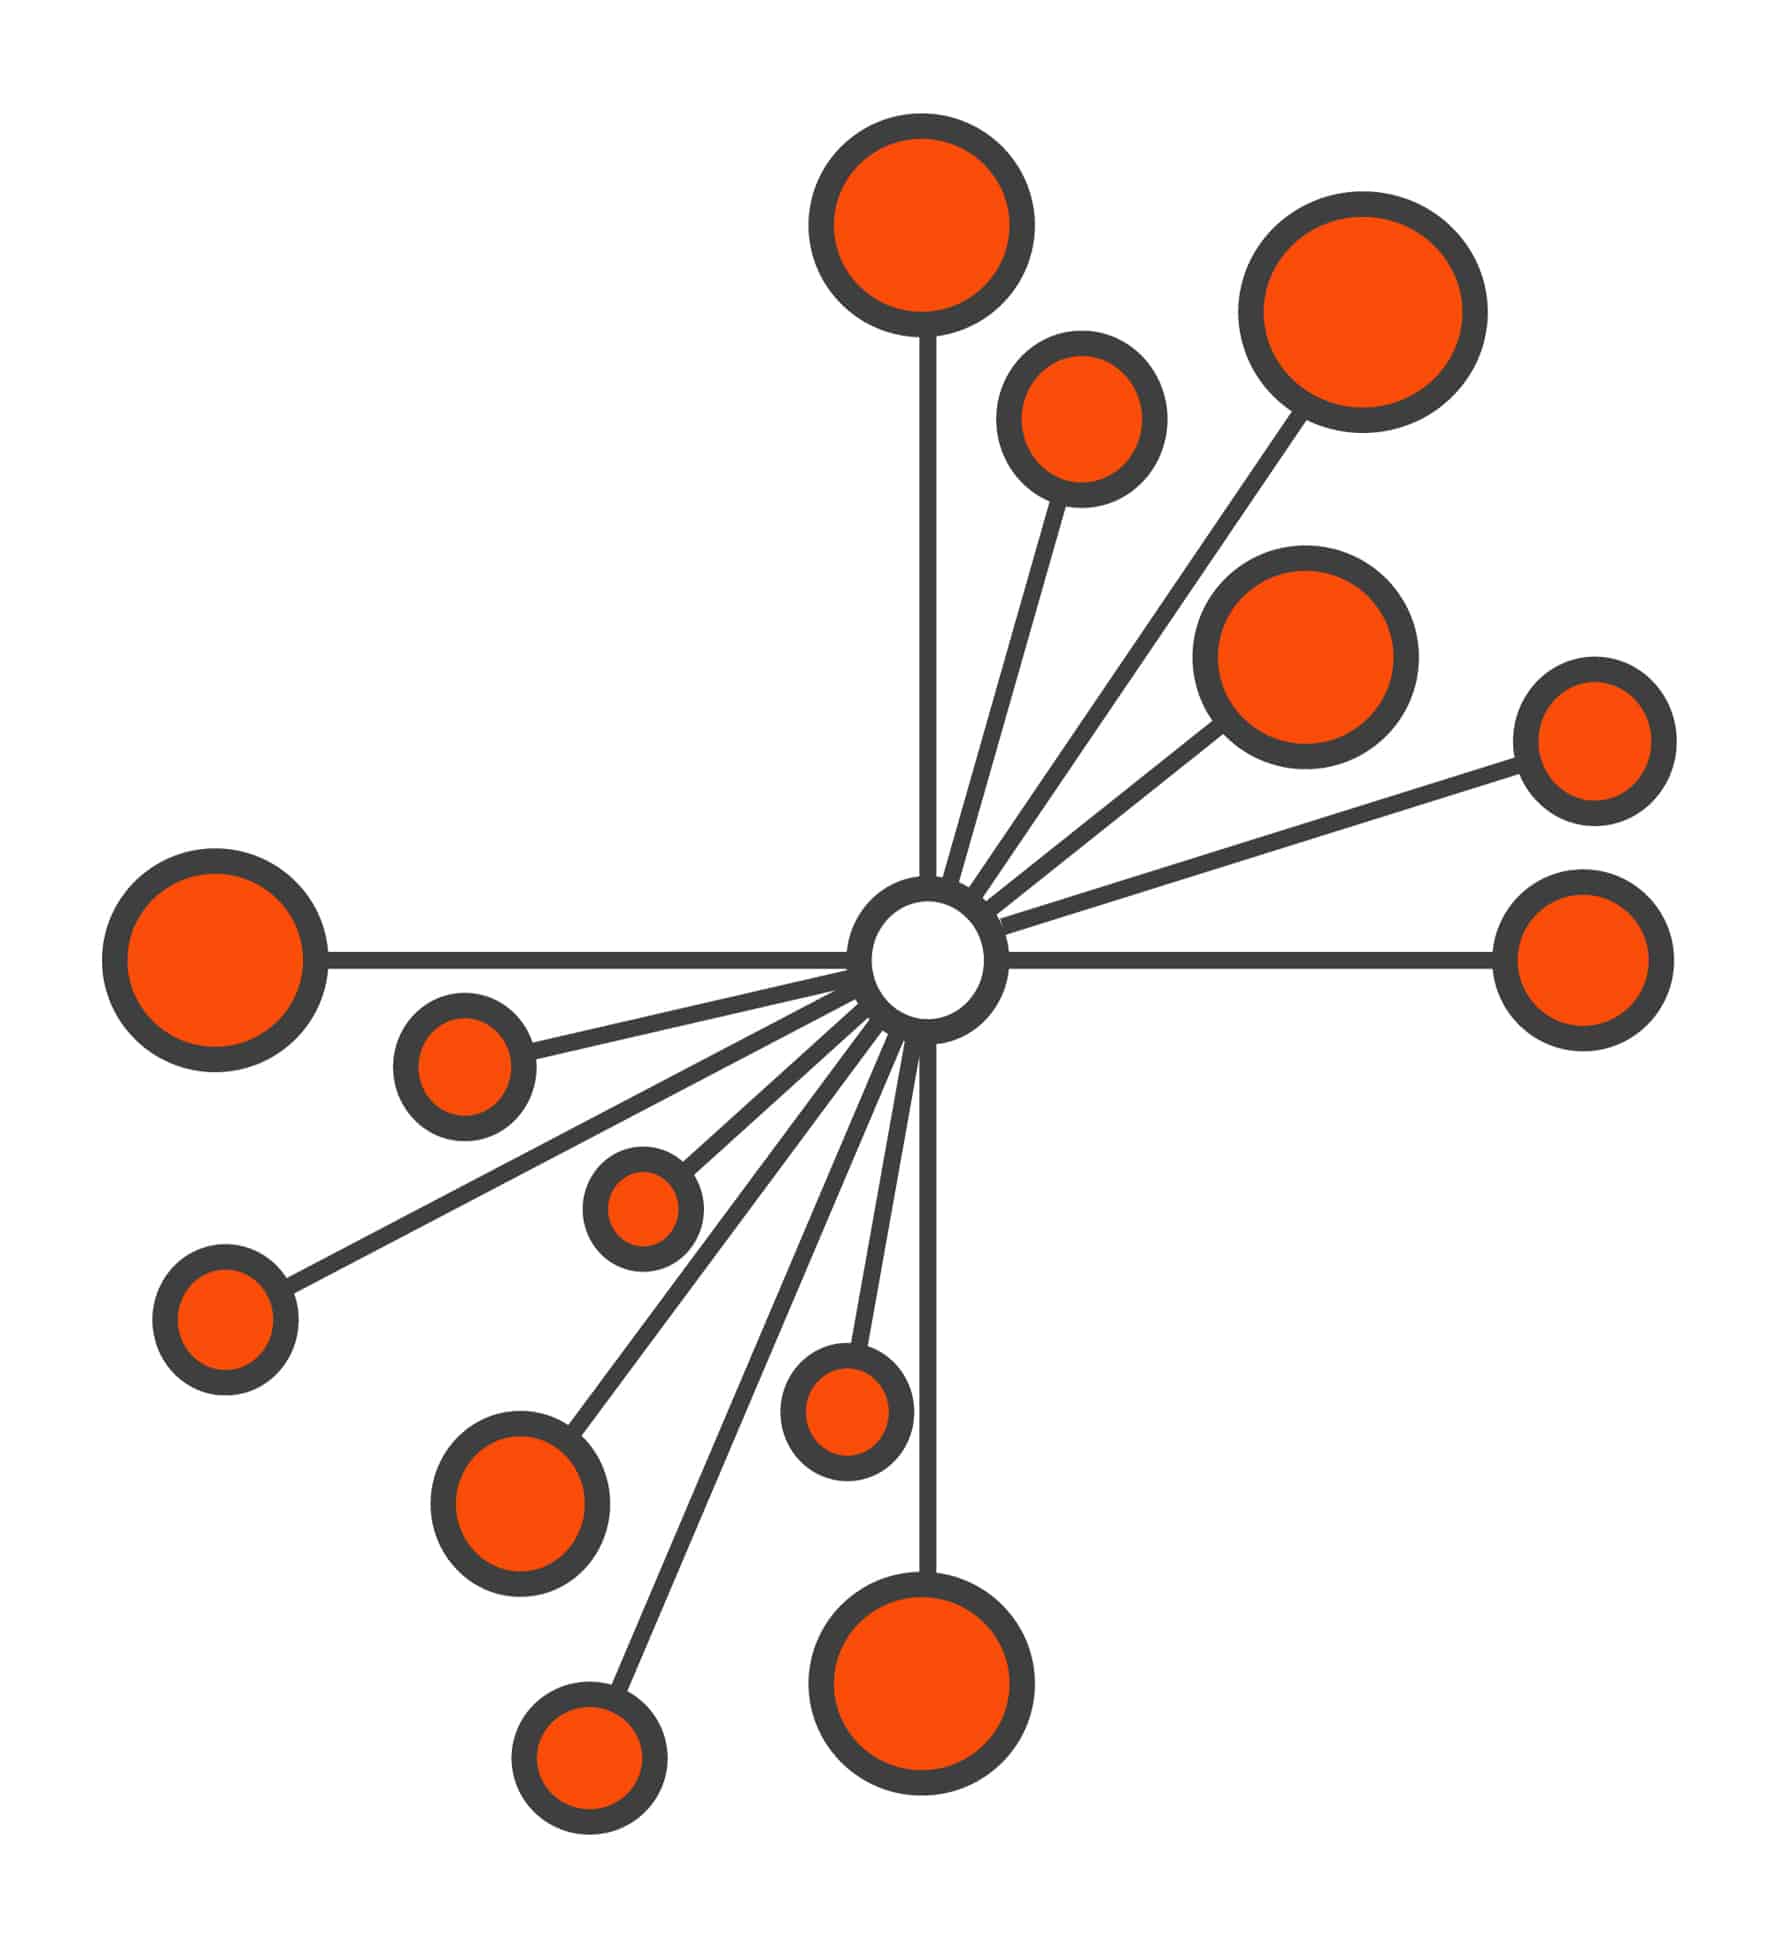 The Student Hubs spokes logo shows 14 orange circles connected to a central white circle by dark grey lines.